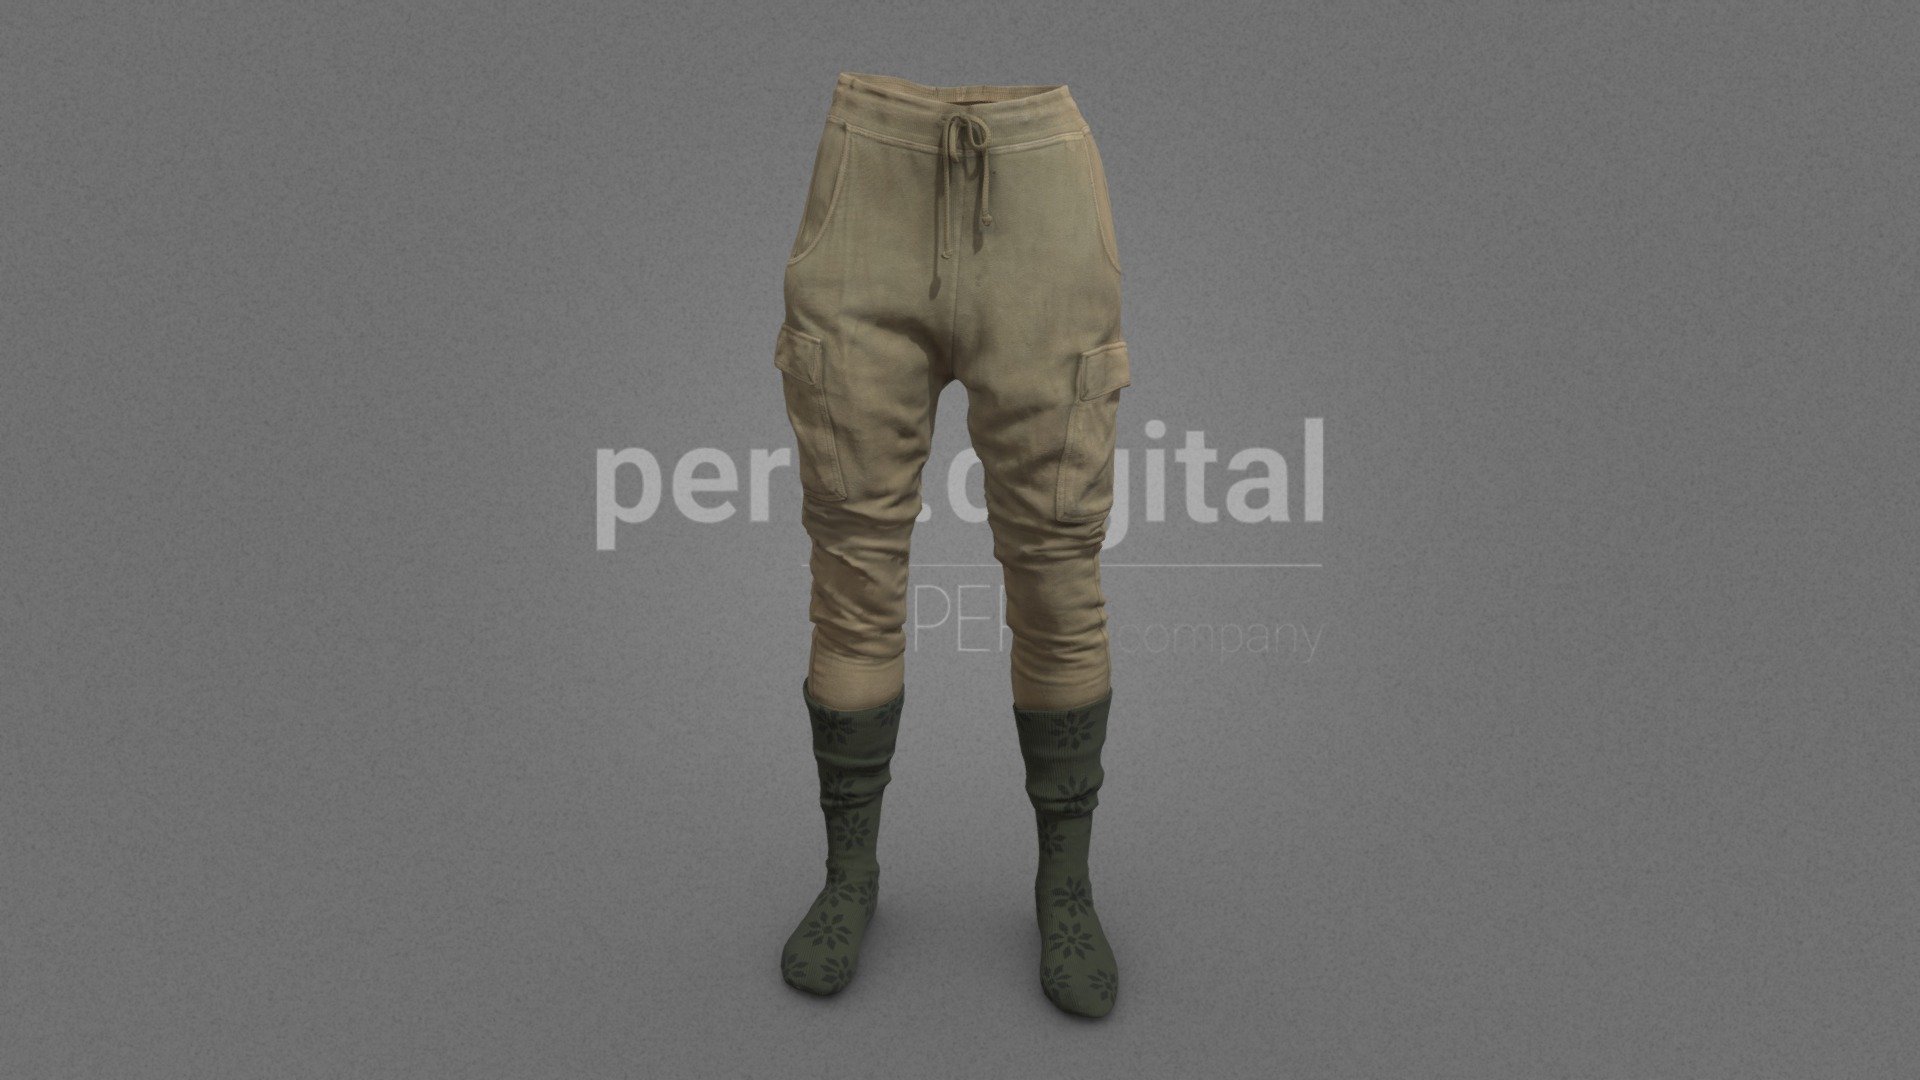 Our Wasteland Garments collection consists of several garments, which you can use in your audiovisual creations, extracted and modeled from our catalog of photogrammetry pieces.

They are optimized for use in 3D scenes of high polygonalization and optimized for rendering. We do not include characters, but they are positioned for you to include and adjust your own character. They have a model LOW (_LODRIG) inside the Blender file (included in the AdditionalFiles), which you can use for vertex weighting or cloth simulation and thus, make the transfer of vertices or property masks from the LOW to the HIGH** model.

We have included the texture maps in high resolution, as well as the Displacement maps, so you can make extreme point of view with your 3D cameras, as well as the Blender file so you can edit any aspect of the set.

Enjoy it.

Web: https://peris.digital/ - Wasteland Garments Series - Model 13 Pants - 3D model by Peris Digital (@perisdigital) 3d model